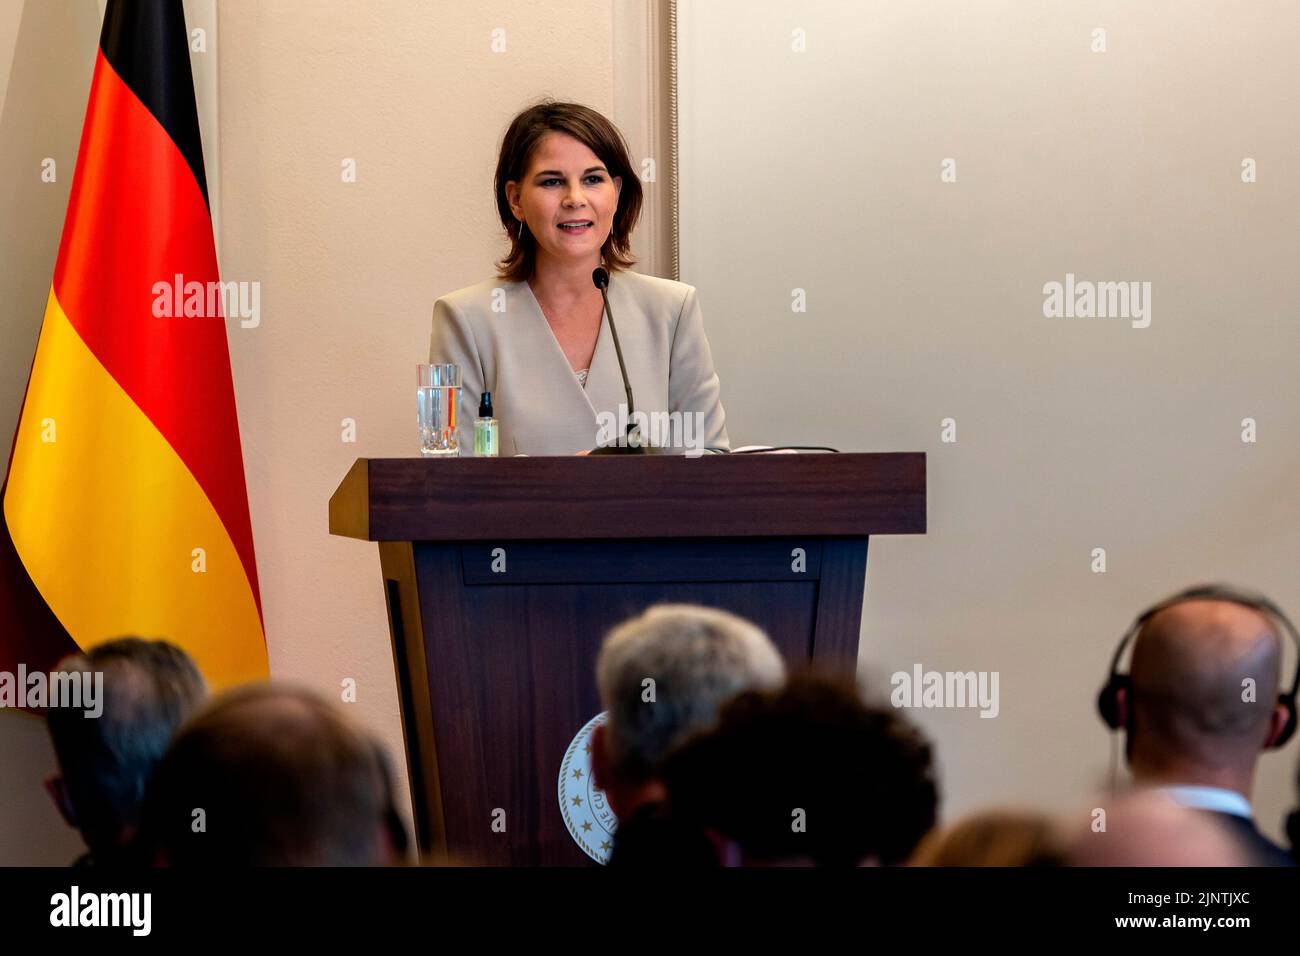 Federal Foreign Minister Annalena Baerbock in a press conference with Turkey's Foreign Minister Mevluet Cavusoglu in Istanbul, July 29, 2022. Copyright: Leon Kuegeler/photothek.de Stock Photo